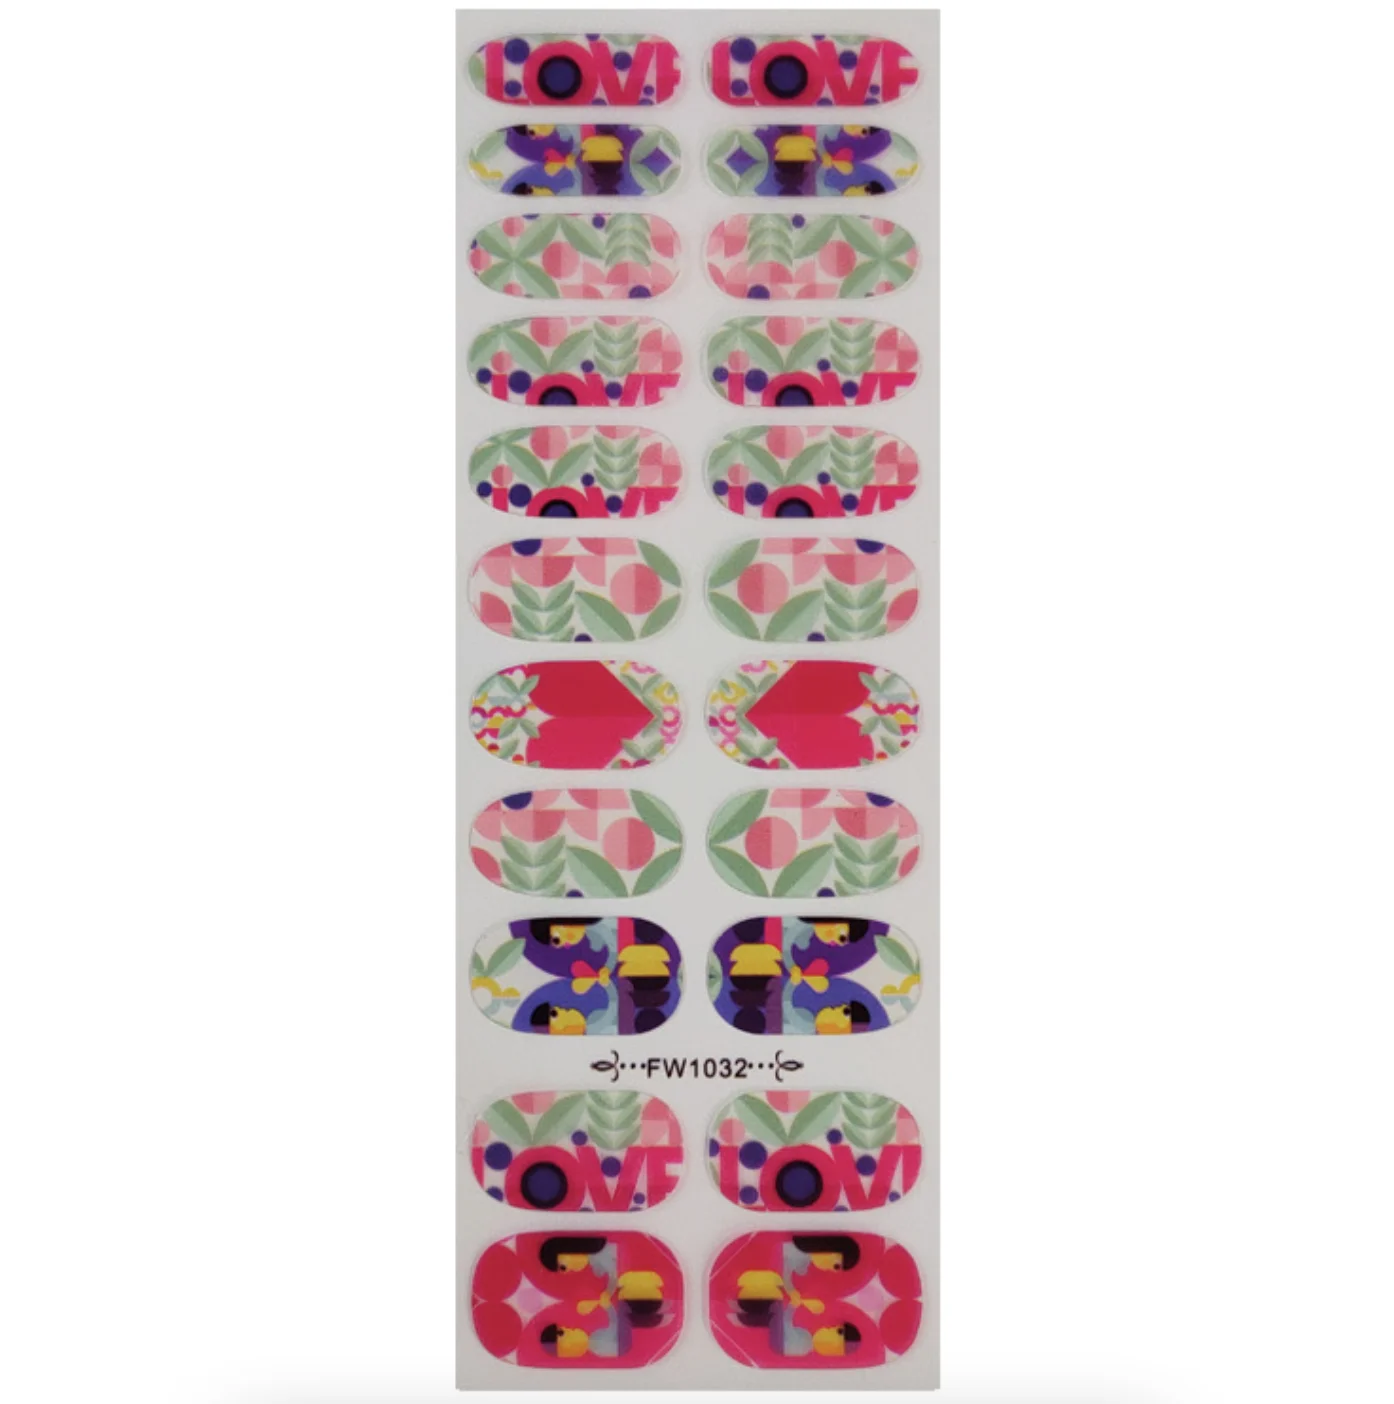 3D Press On Nails Stickers for Nails Nails Parts Spectrum Decorations Manicure Nails Art Full Cover Adhesive Stickers Set images - 6